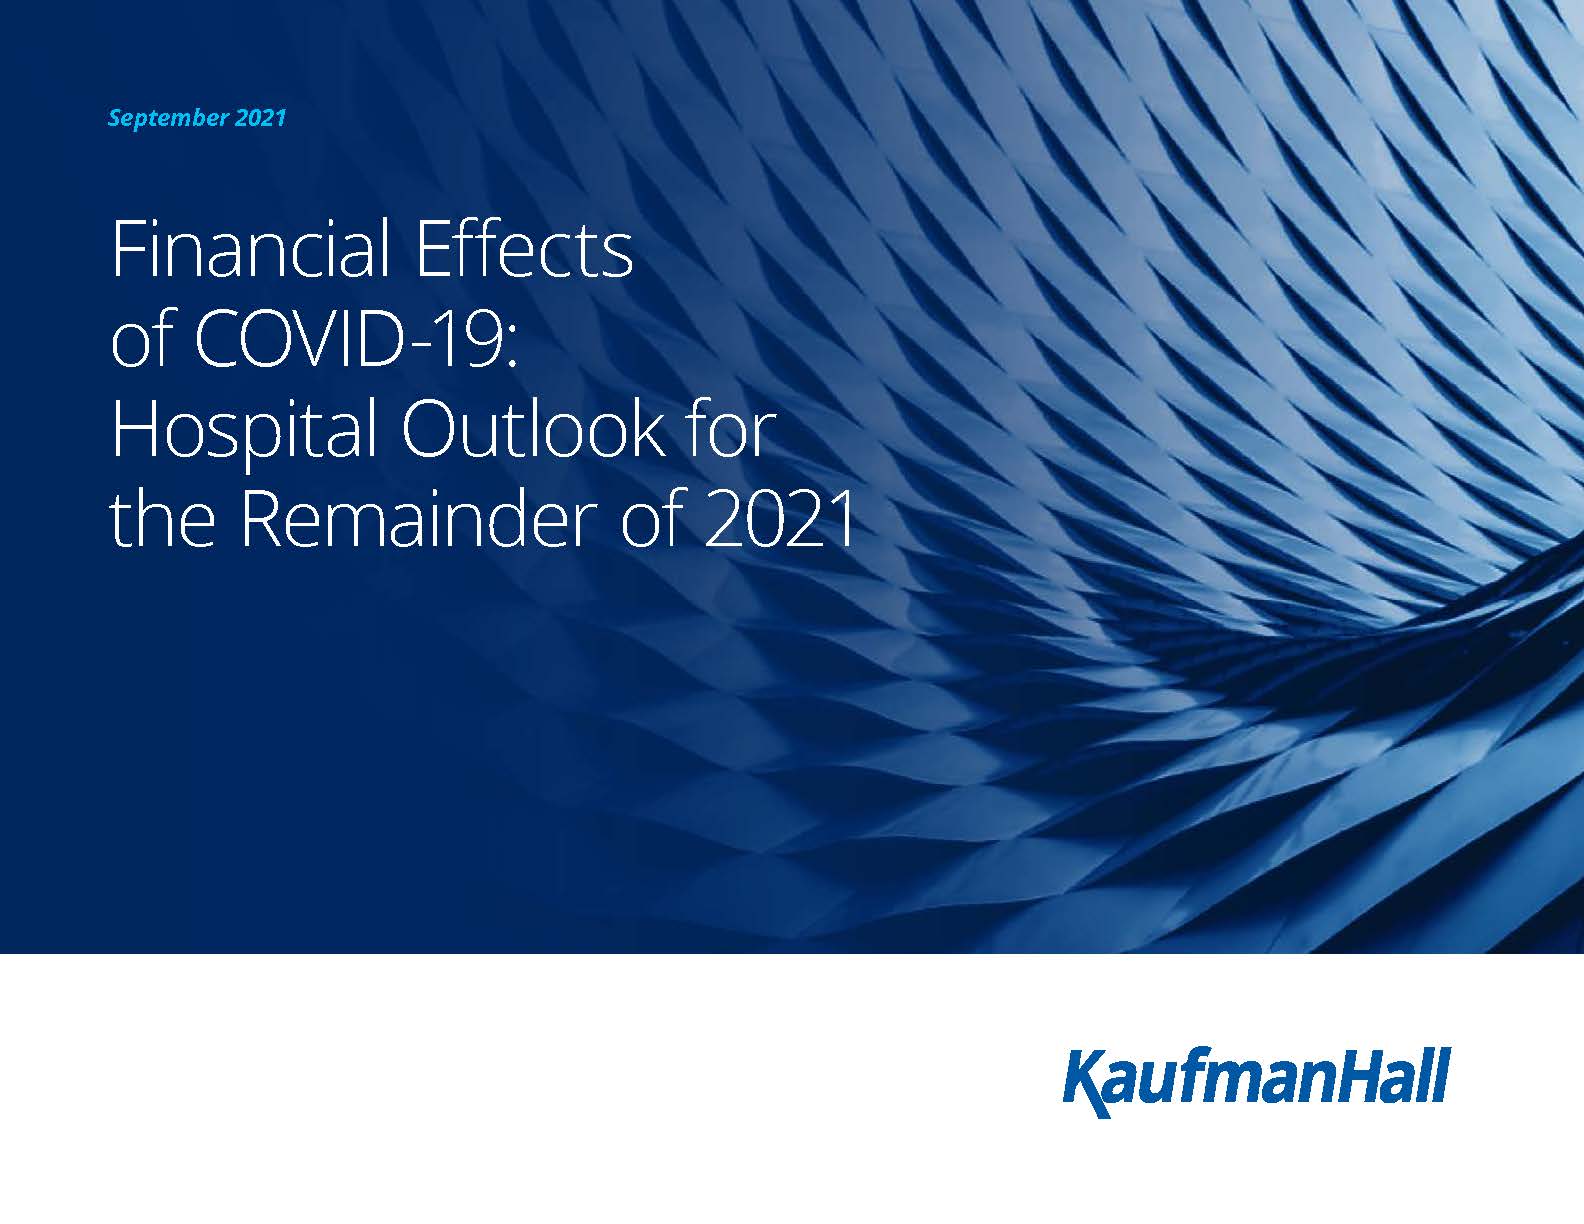 Page one of Financial Effects of COVID-19: Hospital Outlook for the Remainder of 2021. September 2021. KaufmanHall.